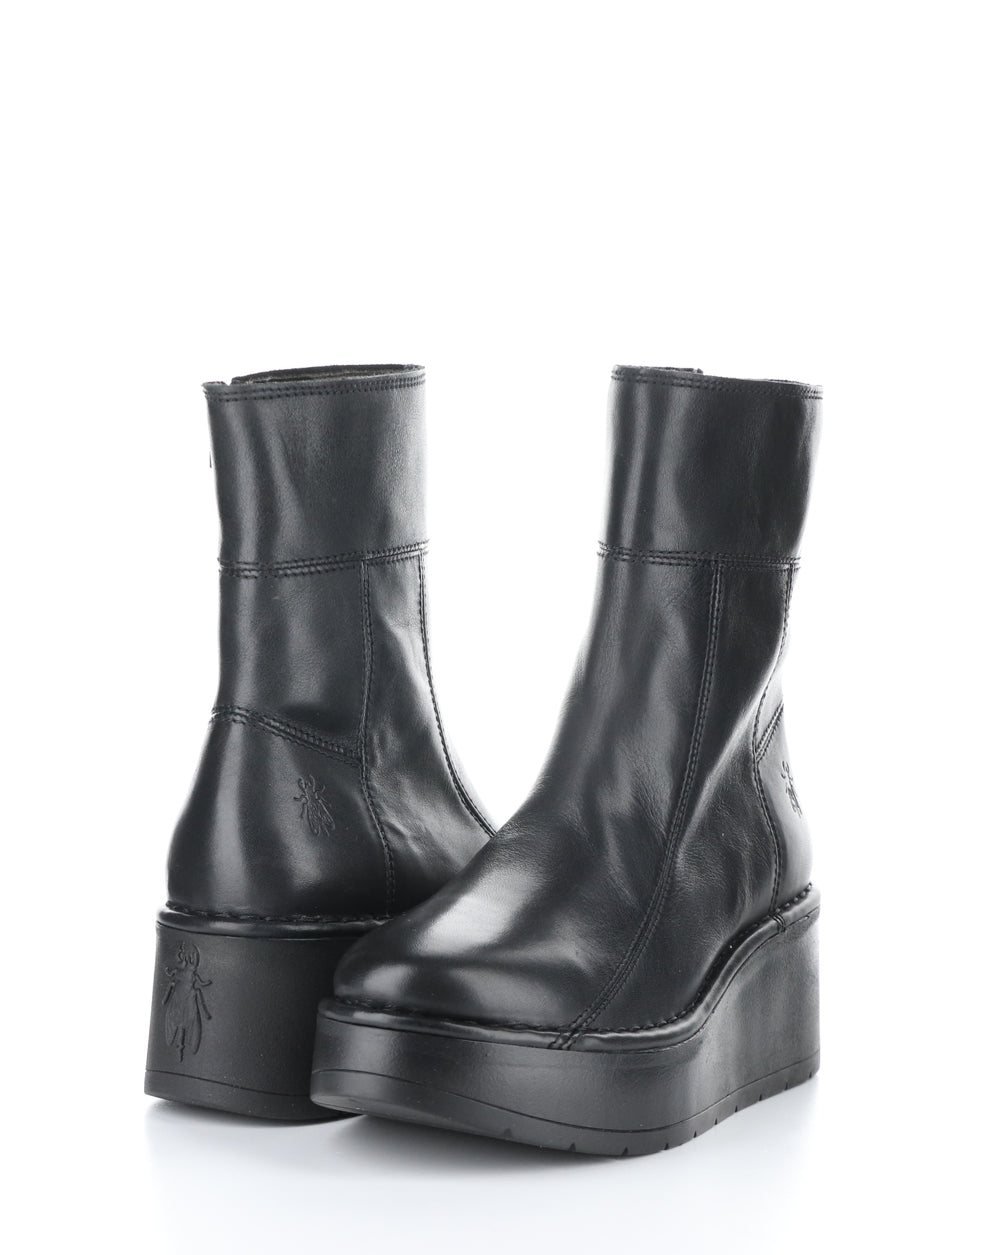 HANN248FLY 000 BLACK Round Toe Boots